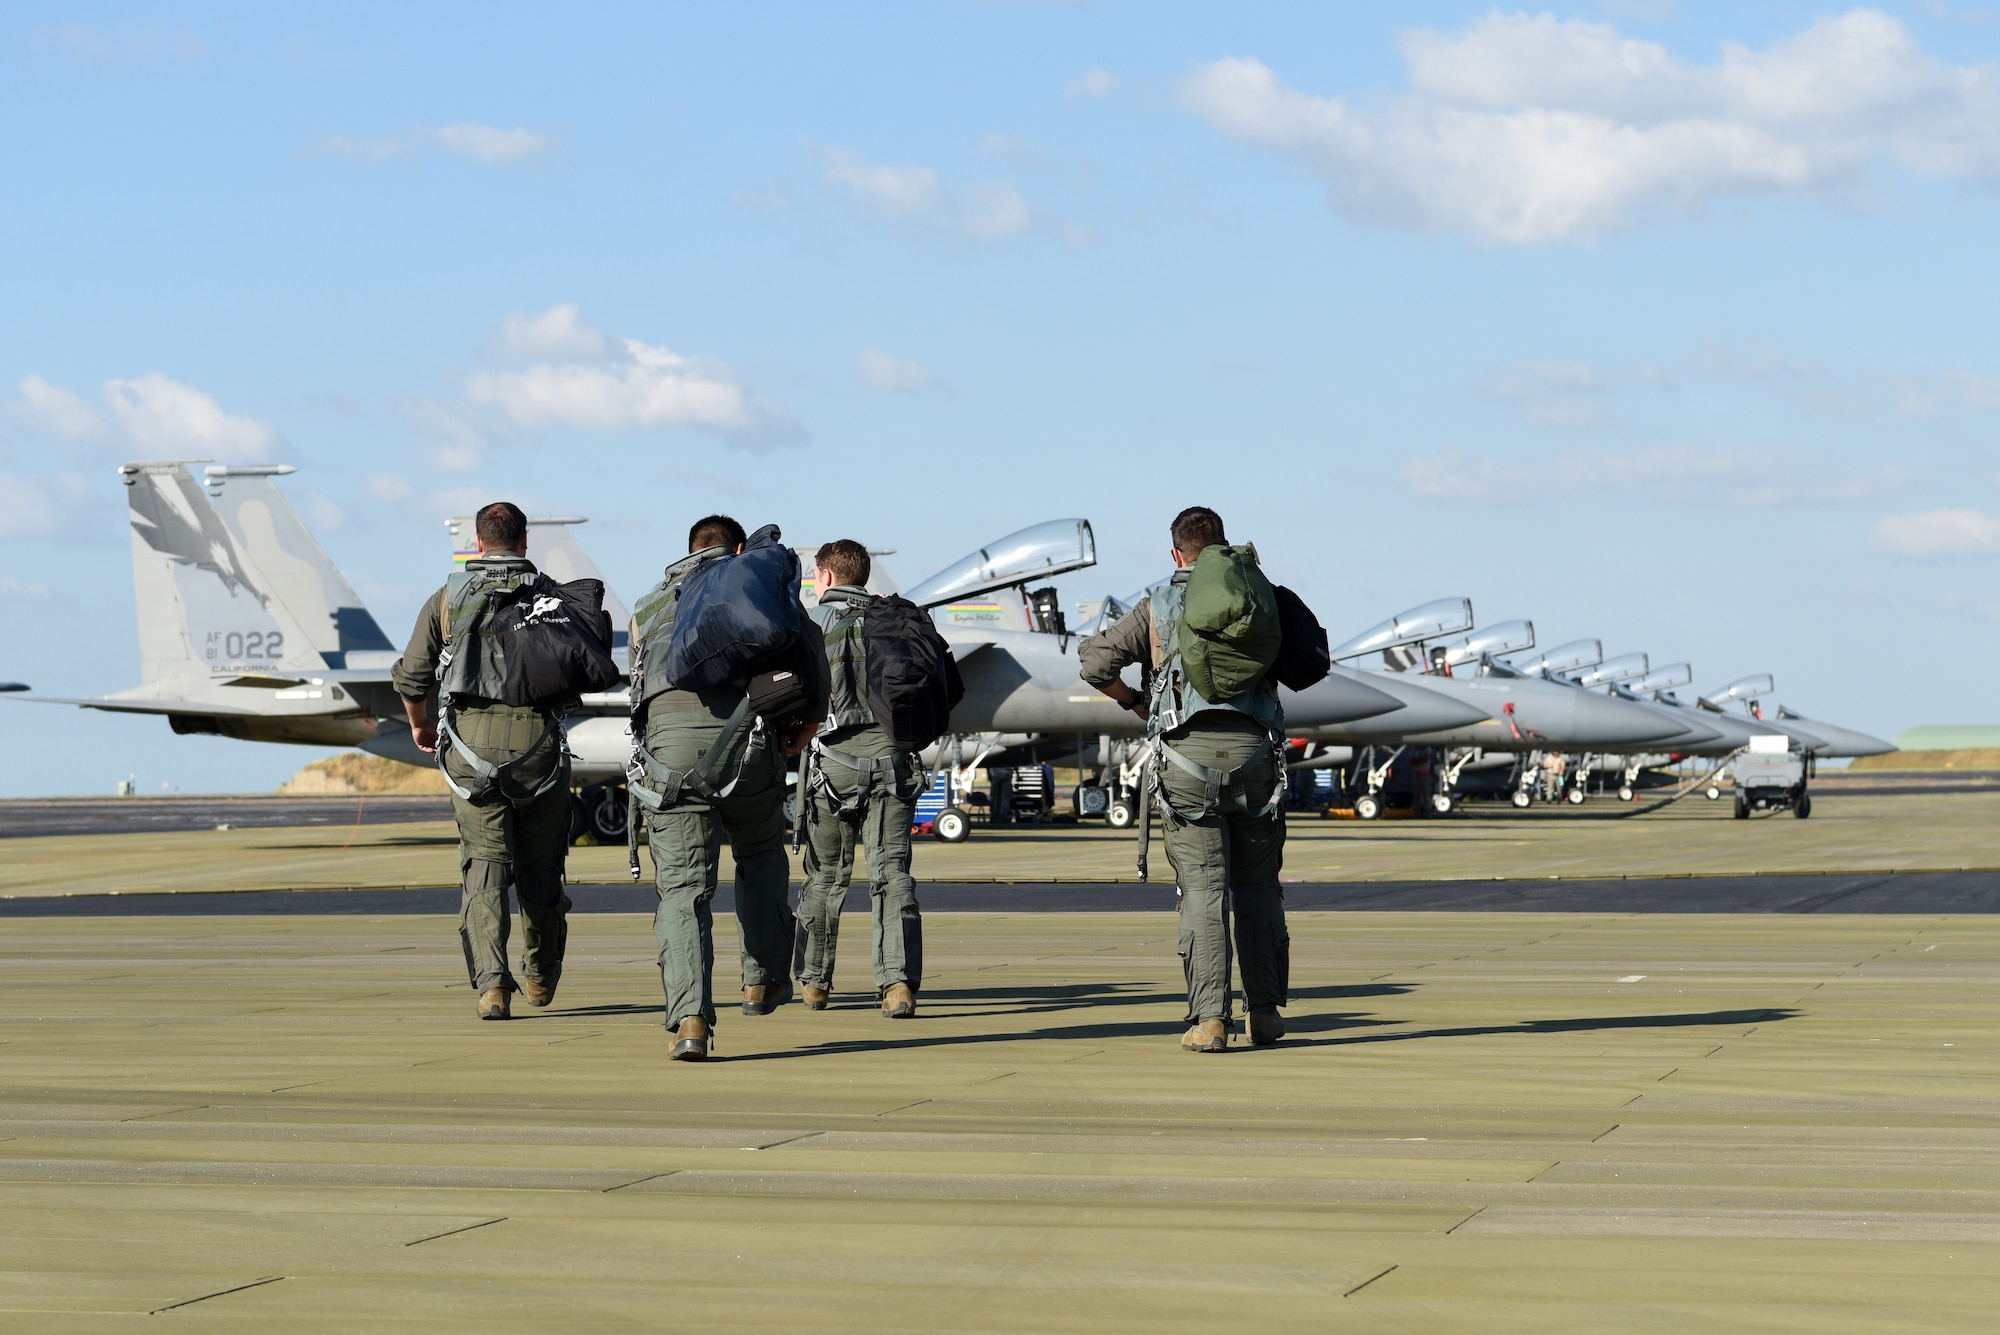 U.S. Air Force pilots assigned to the 194th Expeditionary Fighter Squadron (EFS), California Air National Guard, step to their F-15C Eagles during Exercise Diamond Storm at Royal Australian Air Force Base Darwin, Northern Territory, May 13, 2019.